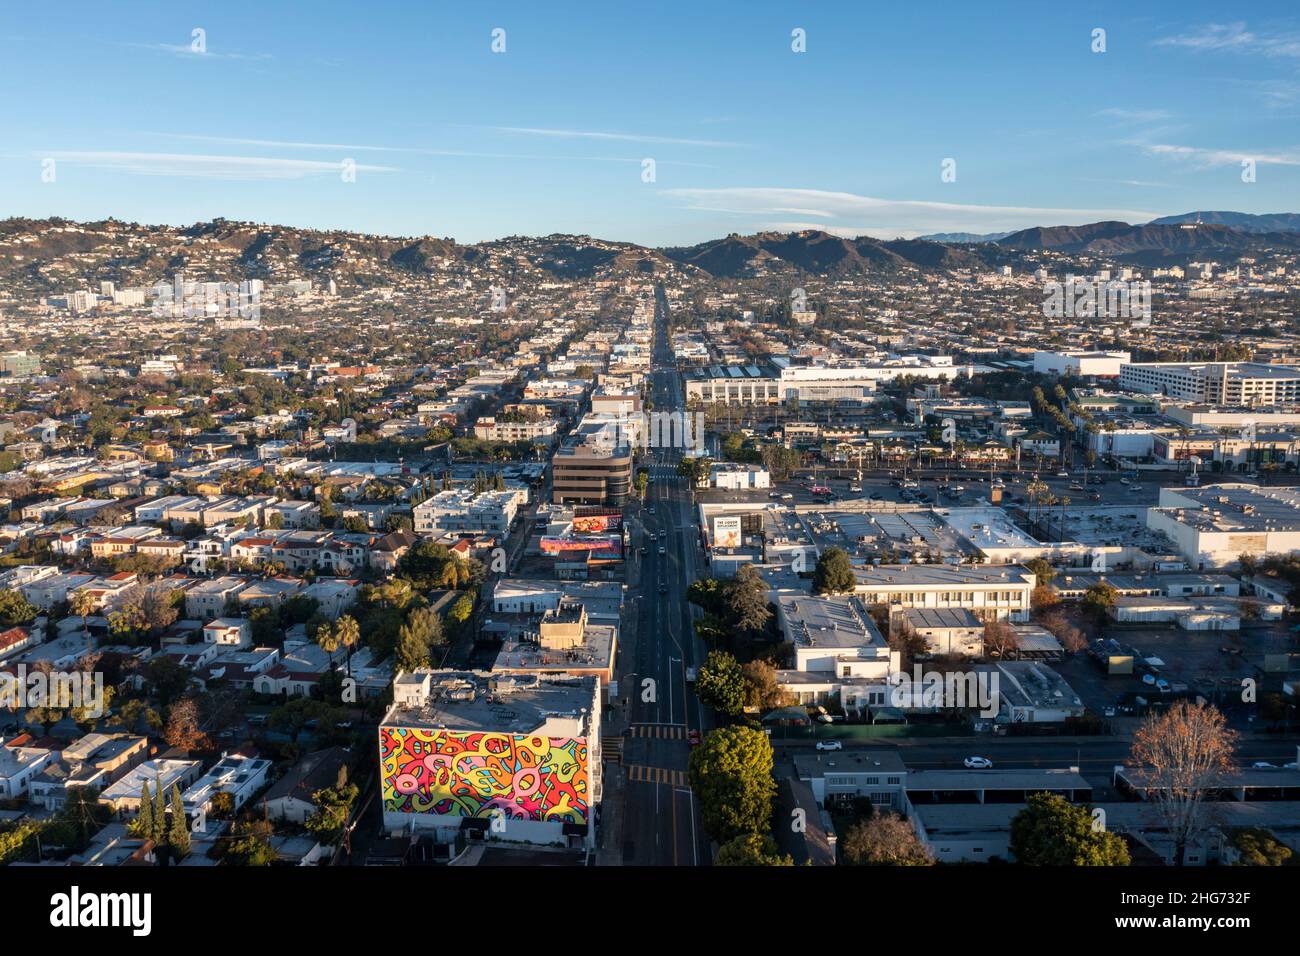 Aerial view looking north along Fairfax Boulevard towards Hollywood from Mid-Wilshire, Los Angeles, California Stock Photo